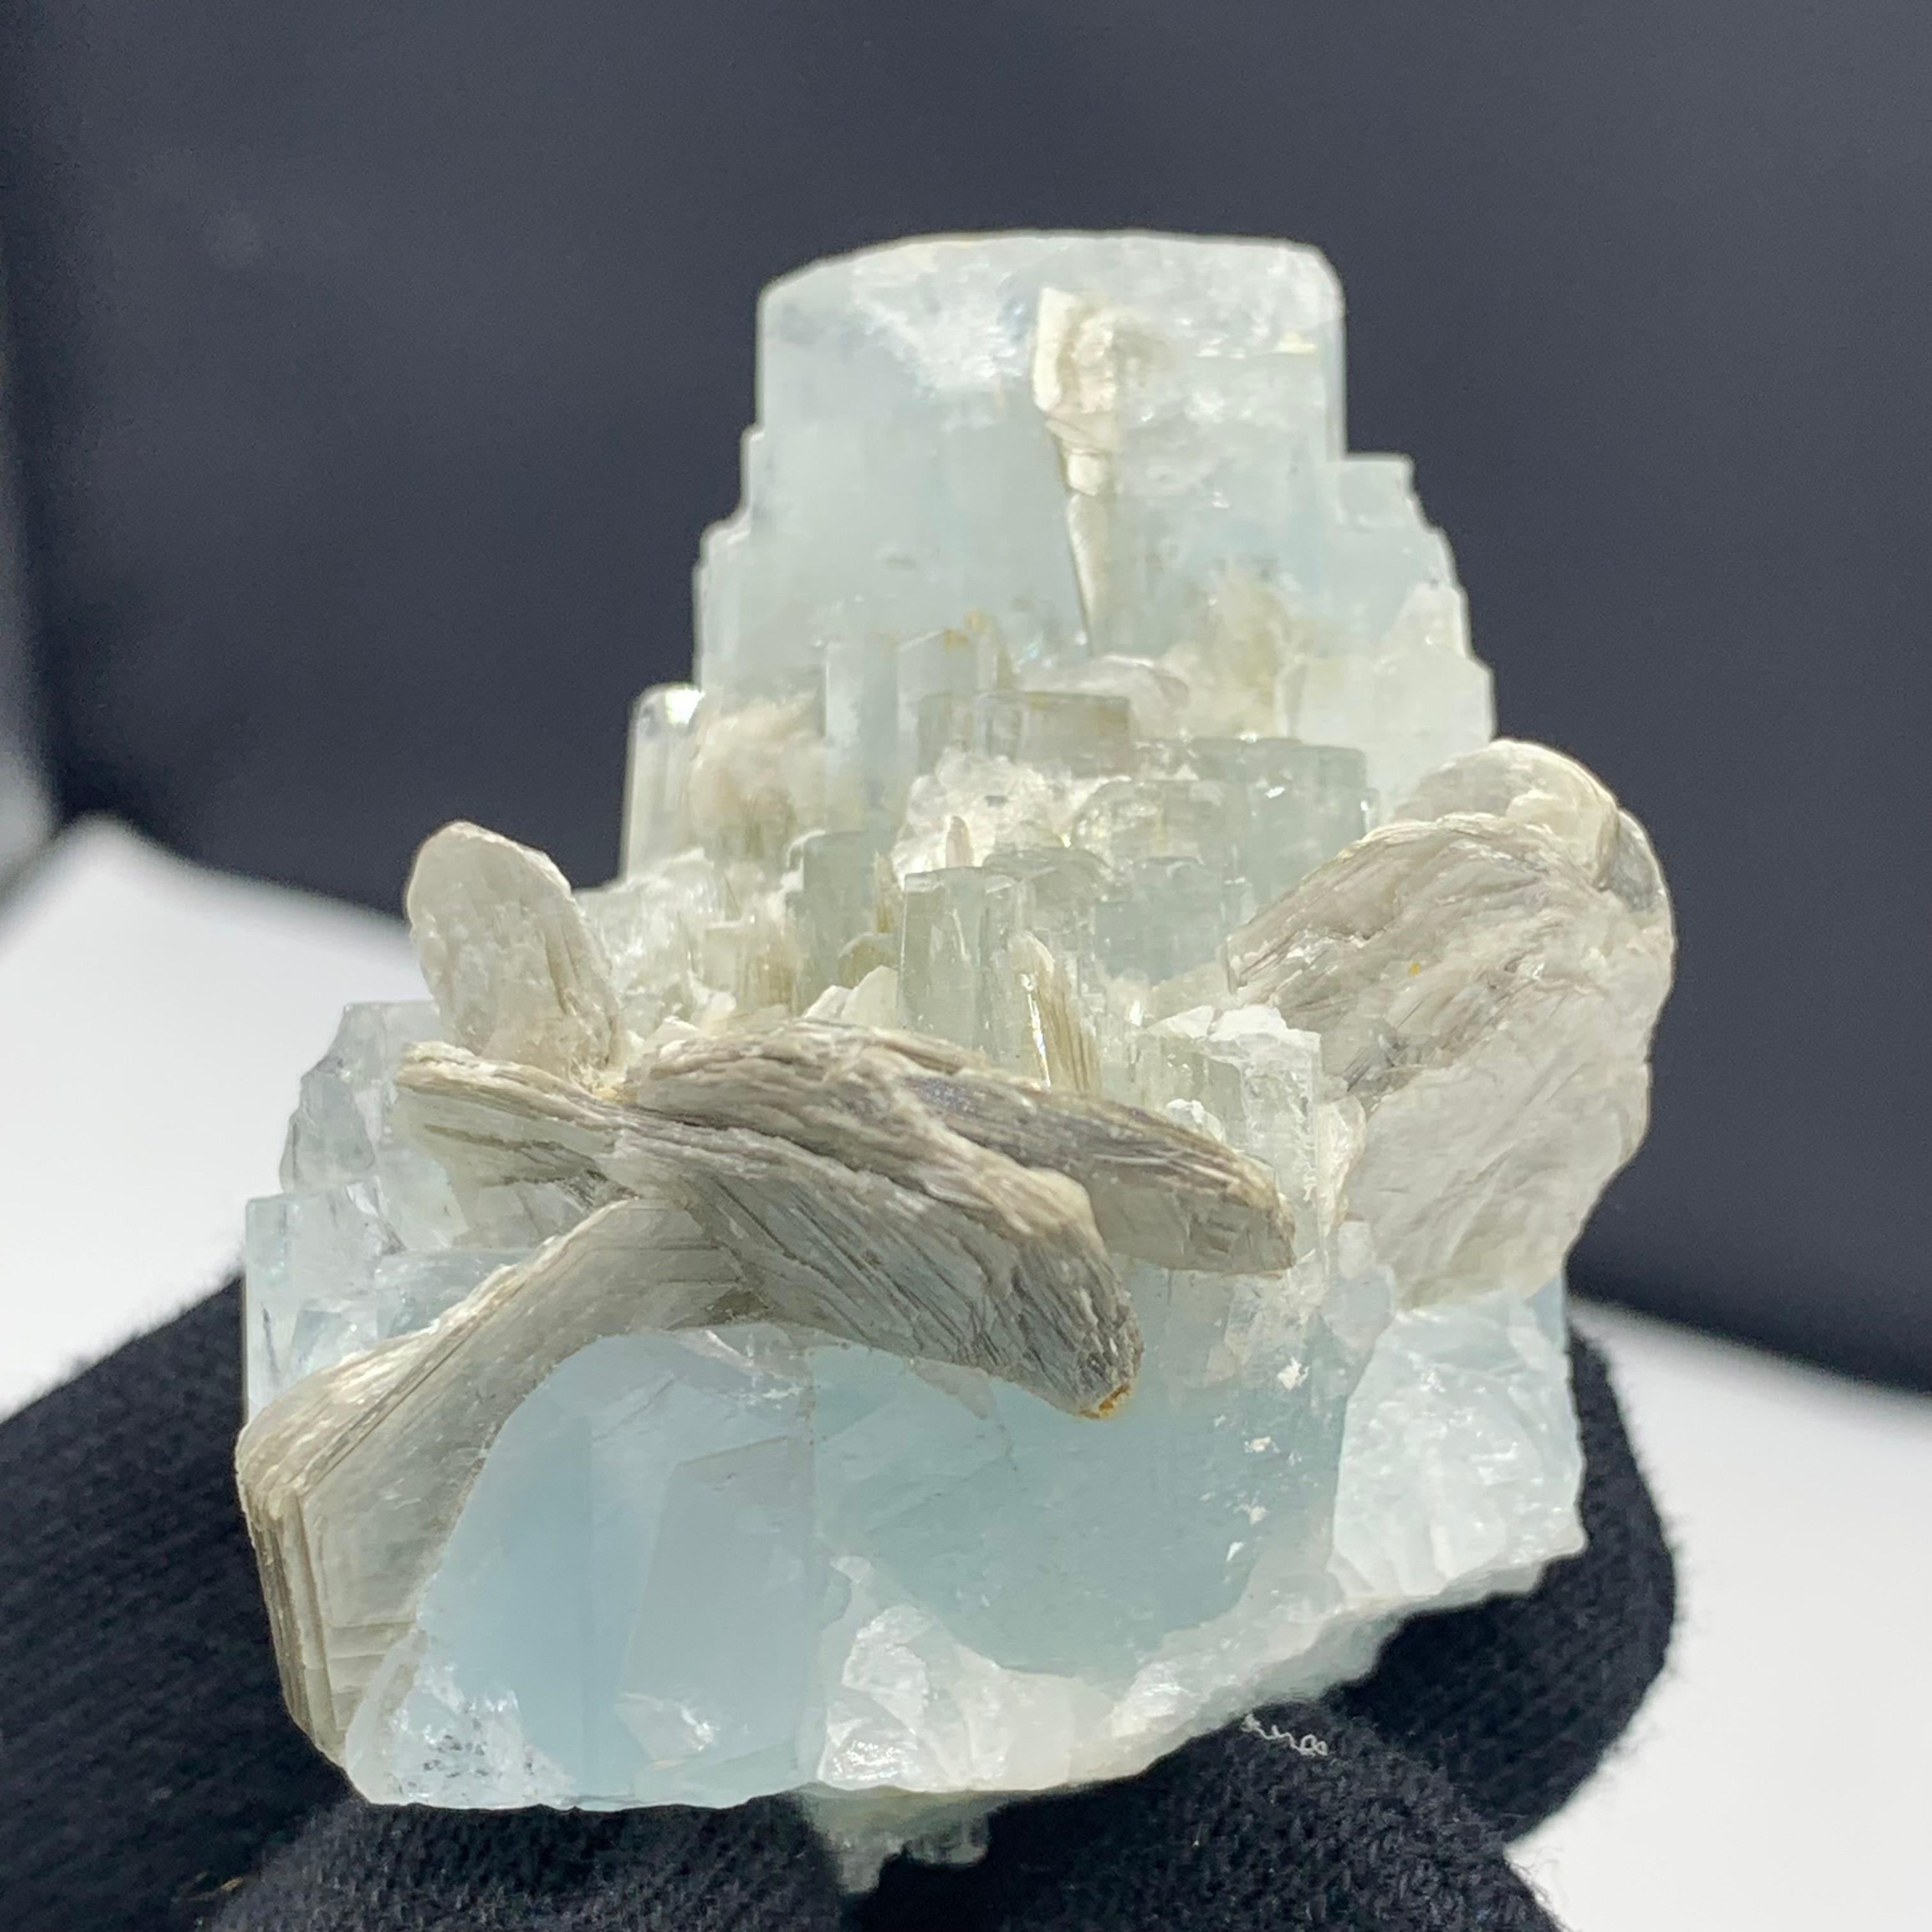 73.96 Gram Amazing Aquamarine Specimen With Muscovite From Skardu, Pakistan 
Weight: 73.96 Gram
Dimension: 5.1 x 4.2 x 3.7 Cm
Origin: Skardu, Pakistan 

Aquamarine is a pale-blue to light-green variety of beryl. The color of aquamarine can be